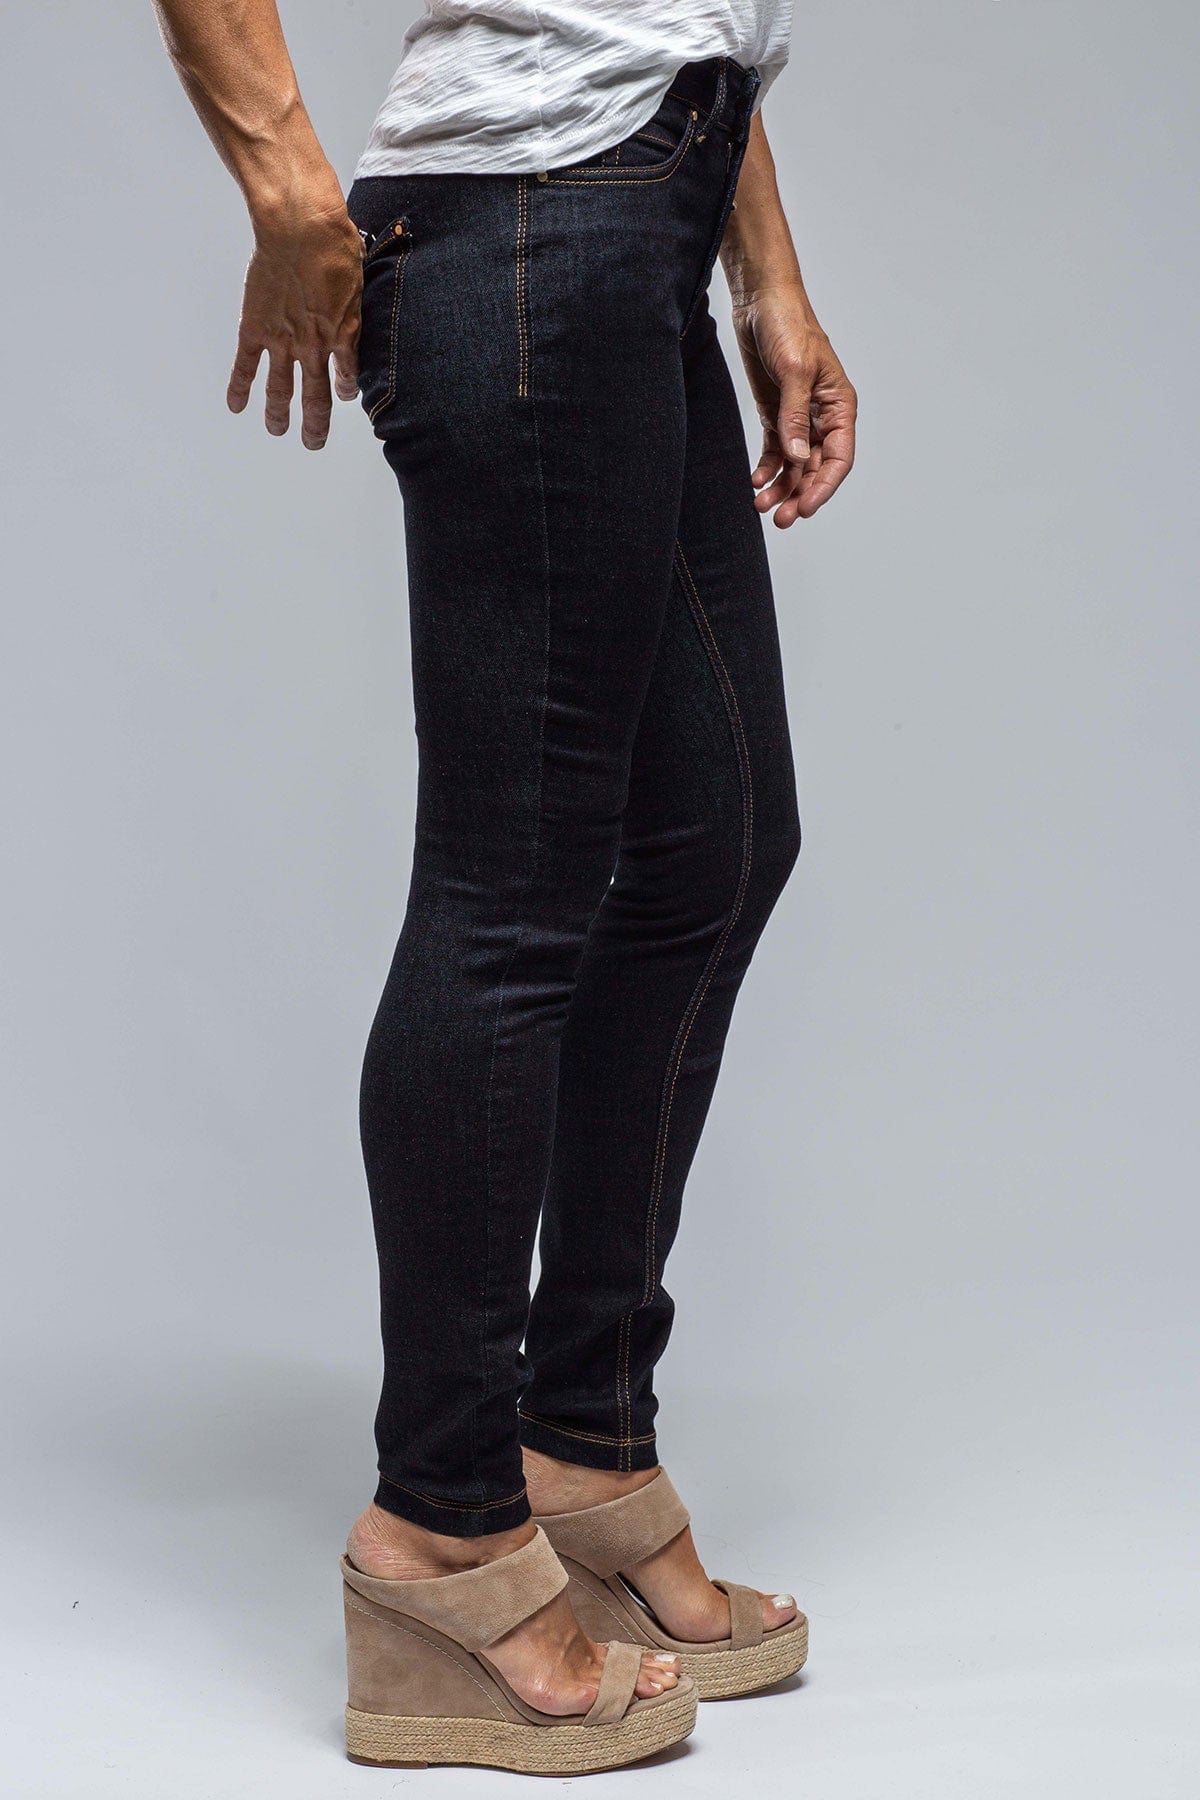 MAC Jeans  Women's Dream Jeans Online at Axel's